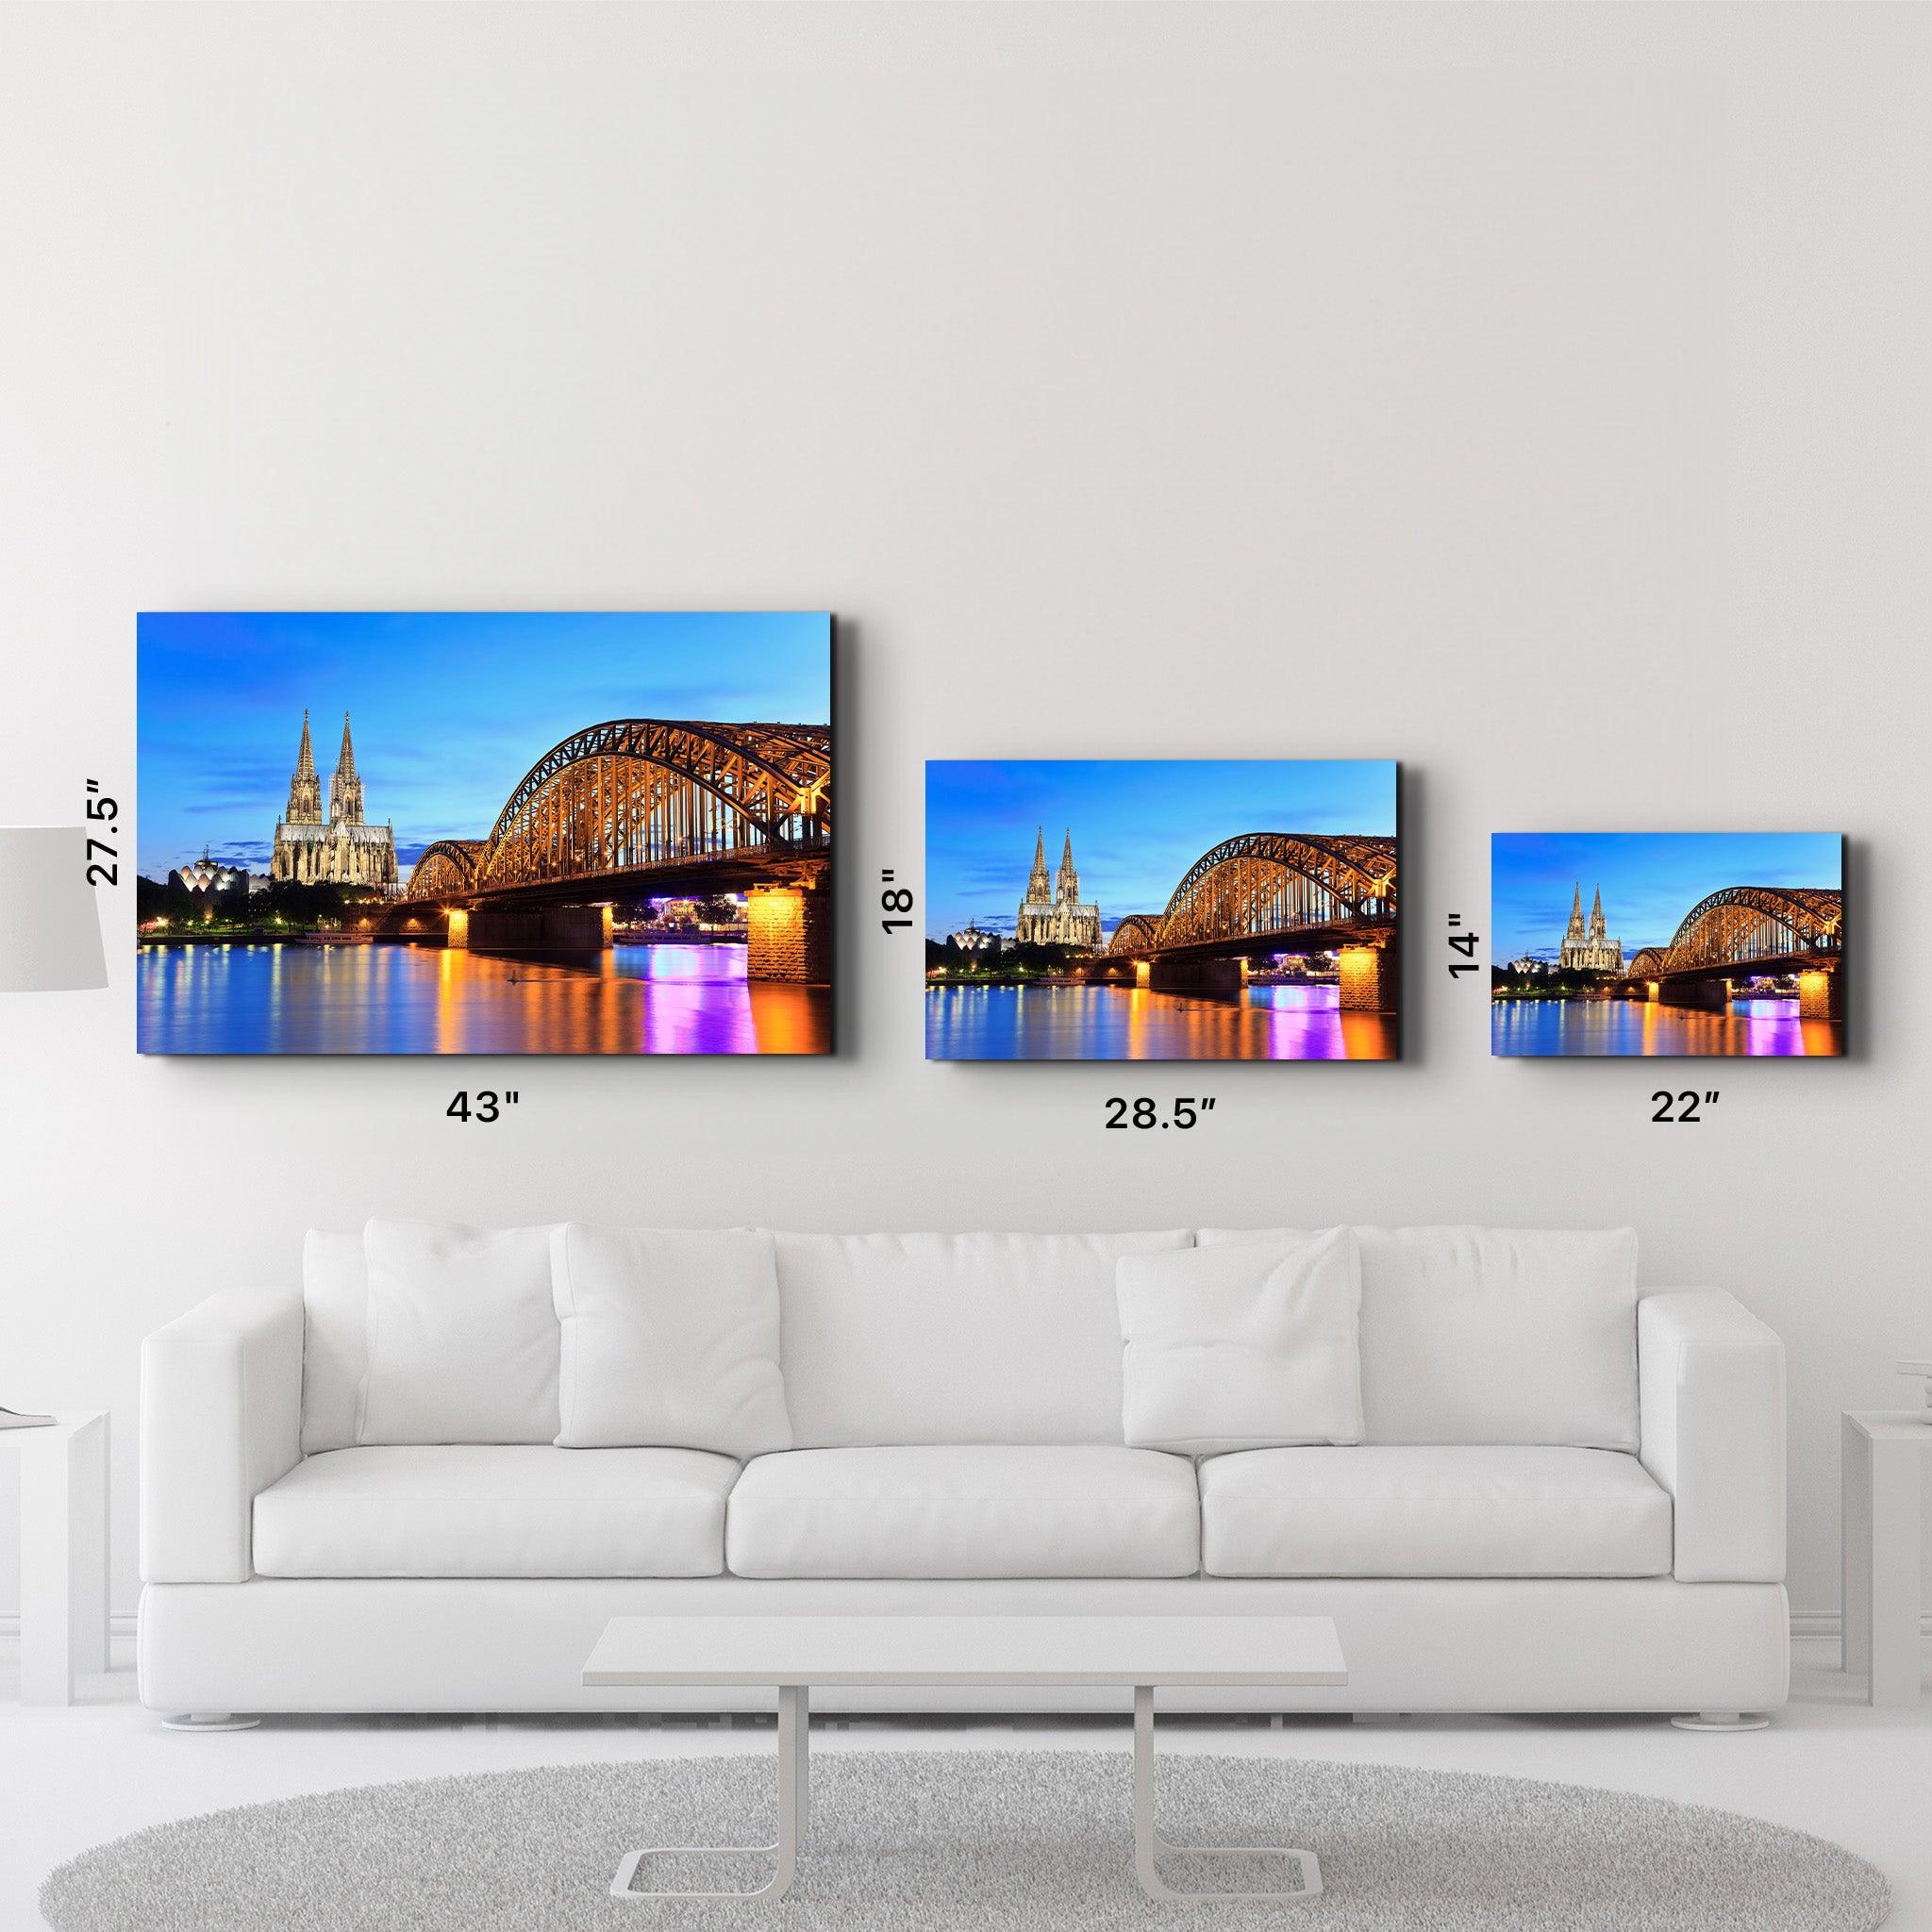 Cologne Dom and city skyline at night, Cologne, Germany | Glass Wall Art - ArtDesigna Glass Printing Wall Art